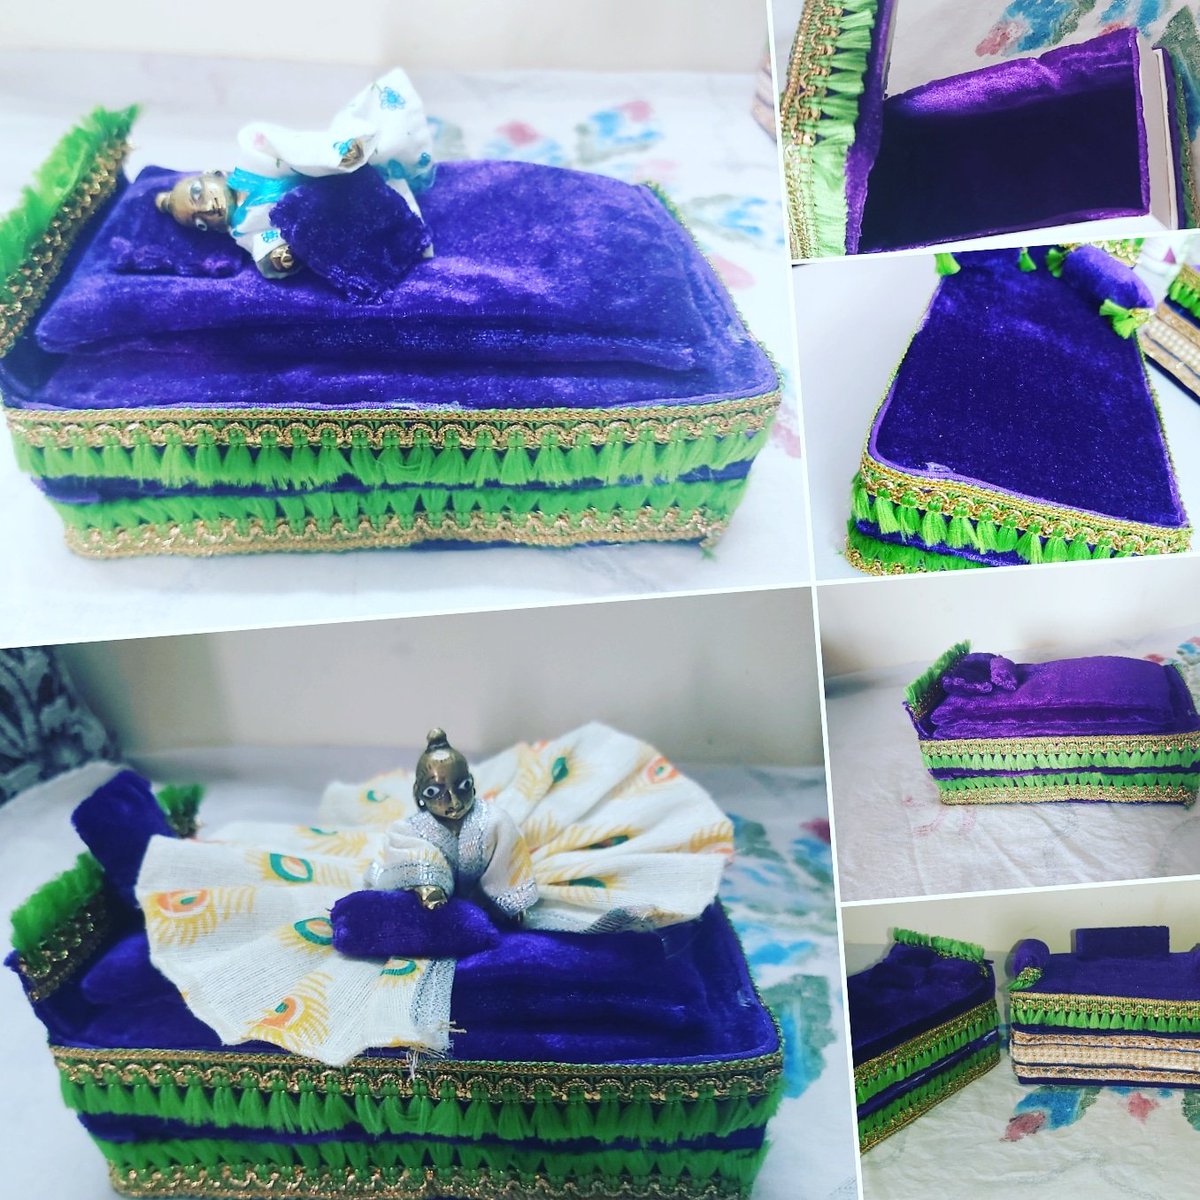 My new creation...deewan cum bed made from mobile box....for my laal
#kanhadress #kanhabed #Shreehitpathshala 

Watch my channel for full videos
youtube.com/channel/UCjuPp…